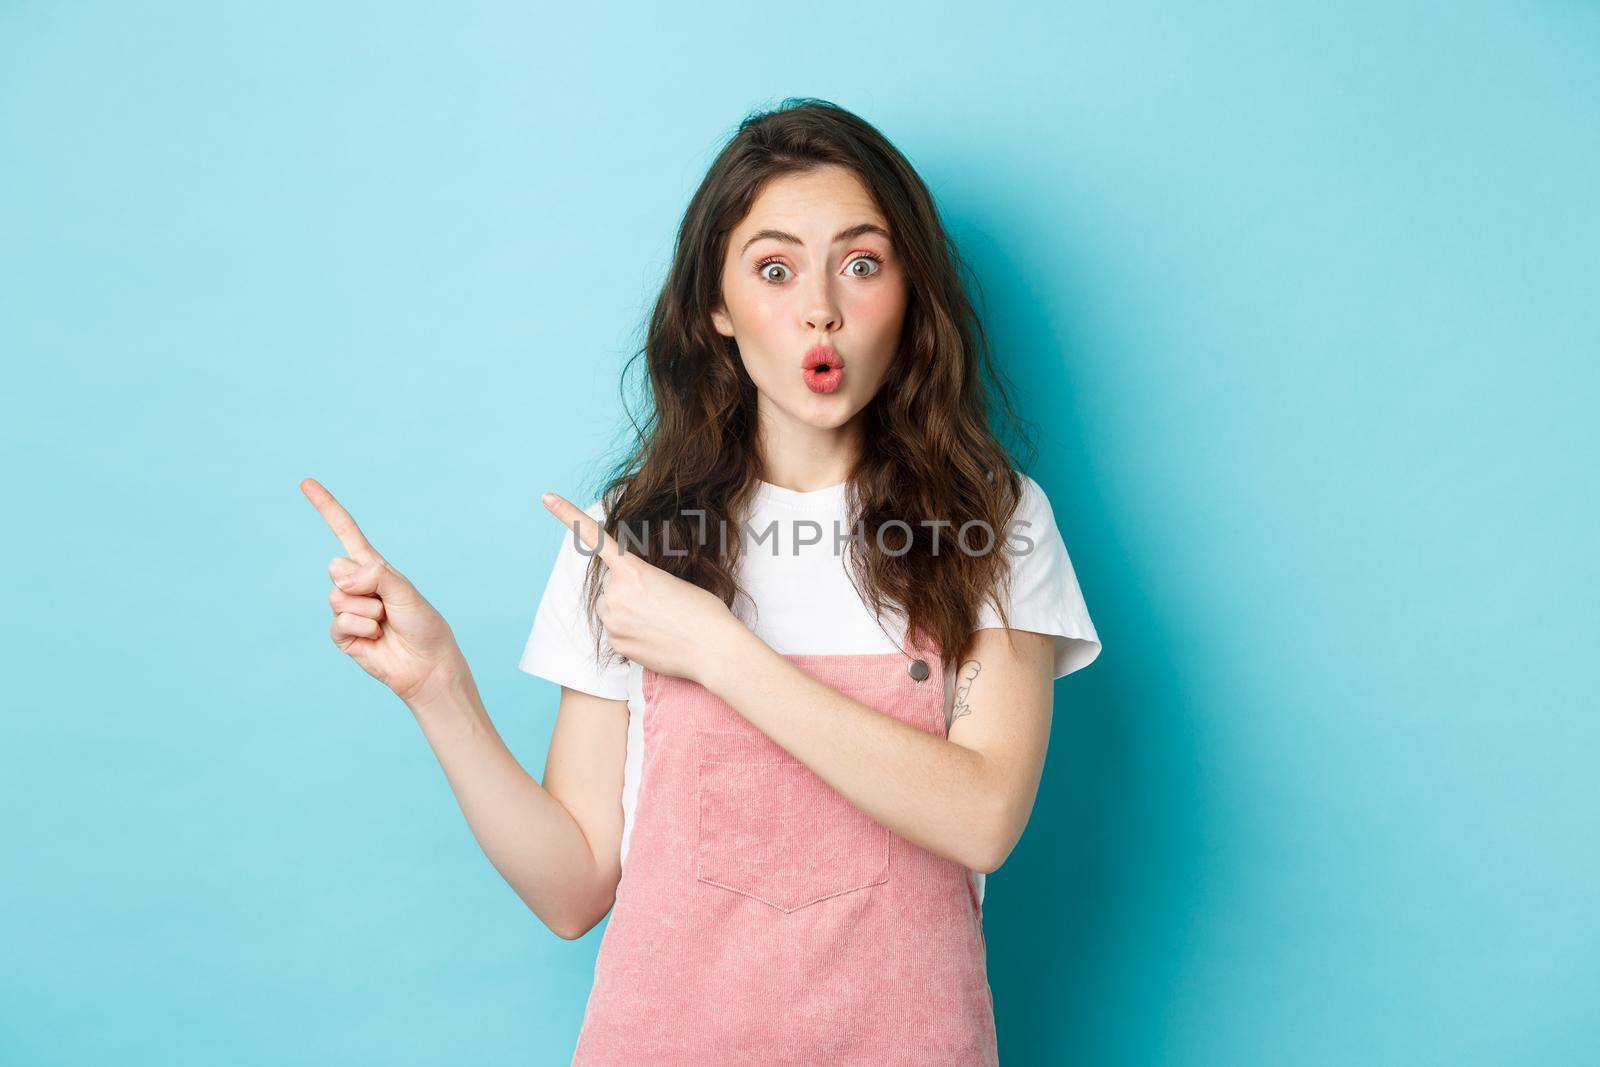 Wow check this out. Amazed brunette female model pucker lips and look intrigued, pointing fingers left at something interesting, showing banner, blue background.